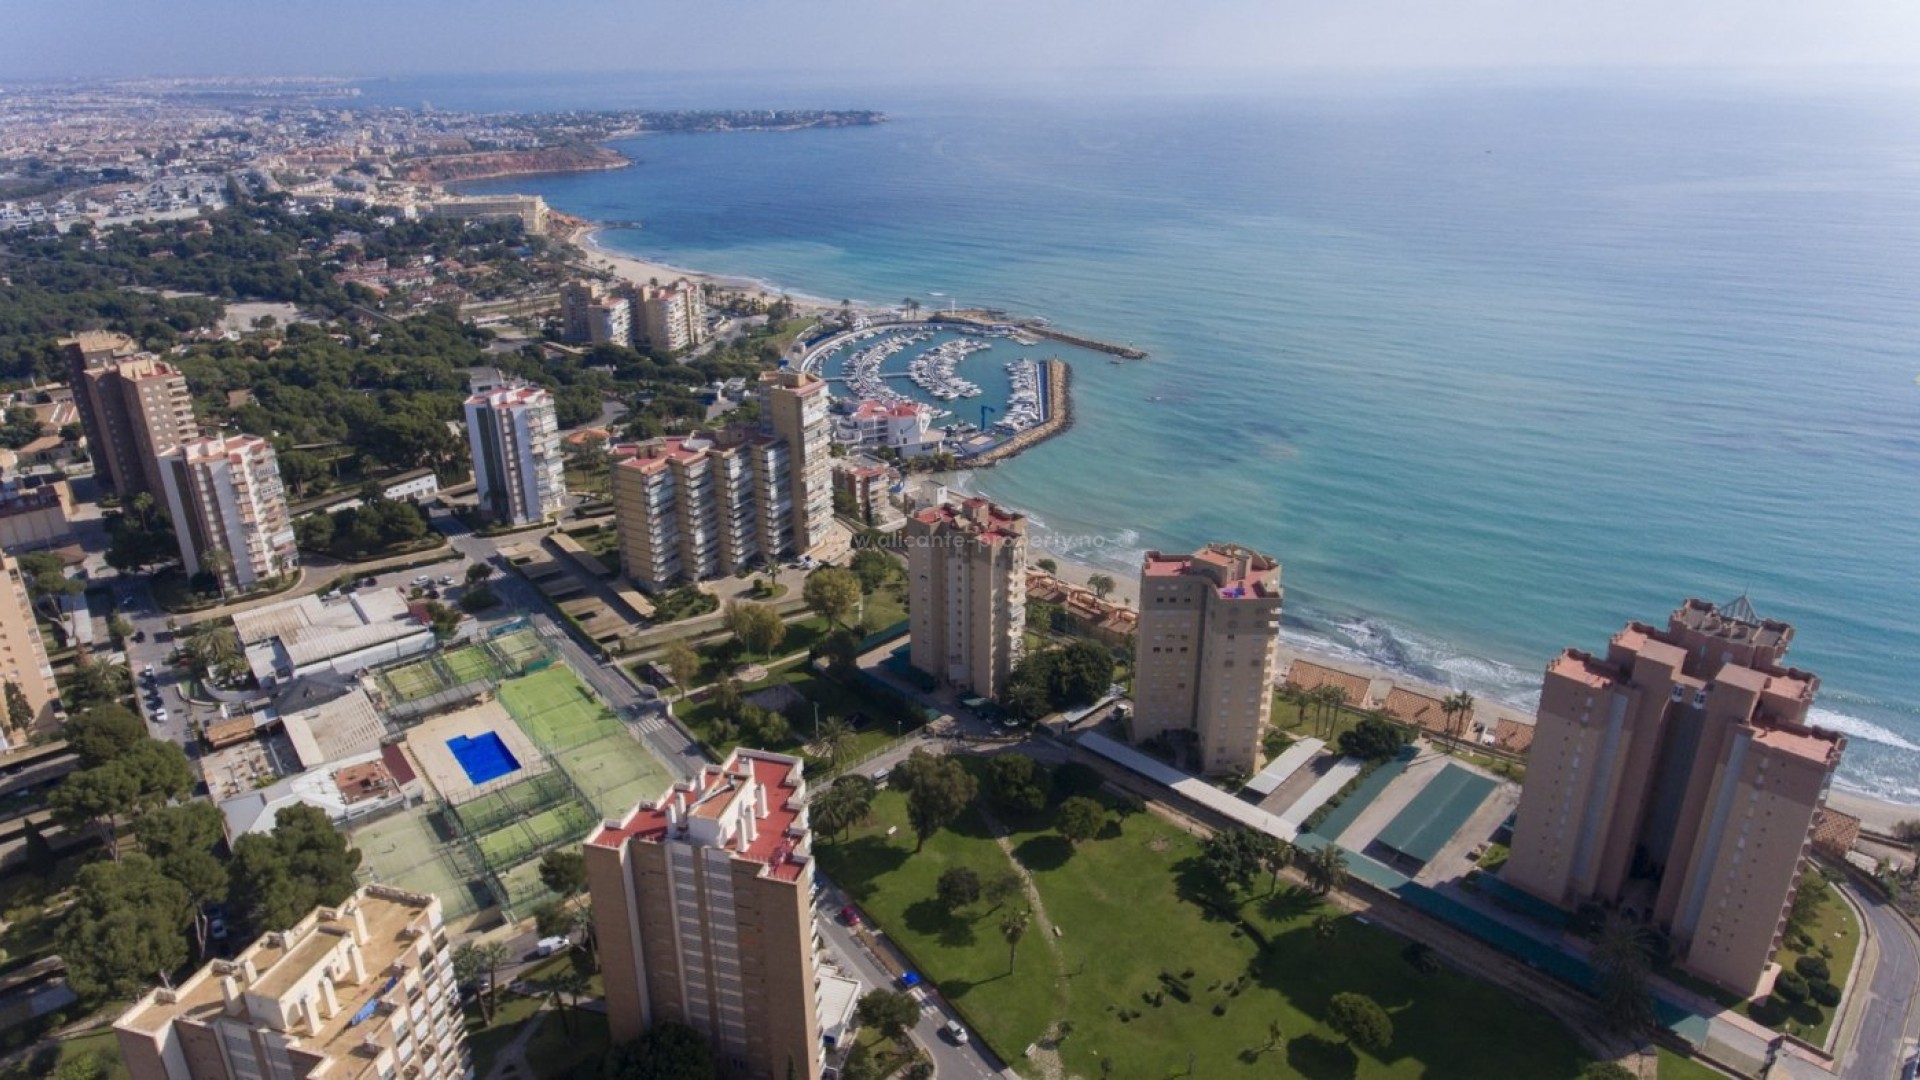 Luxury apartments by the sea and La Glea beach in Campoamor, 3 bedrooms, 2 bathrooms, heated indoor pool, large terrace and nice shared garden.